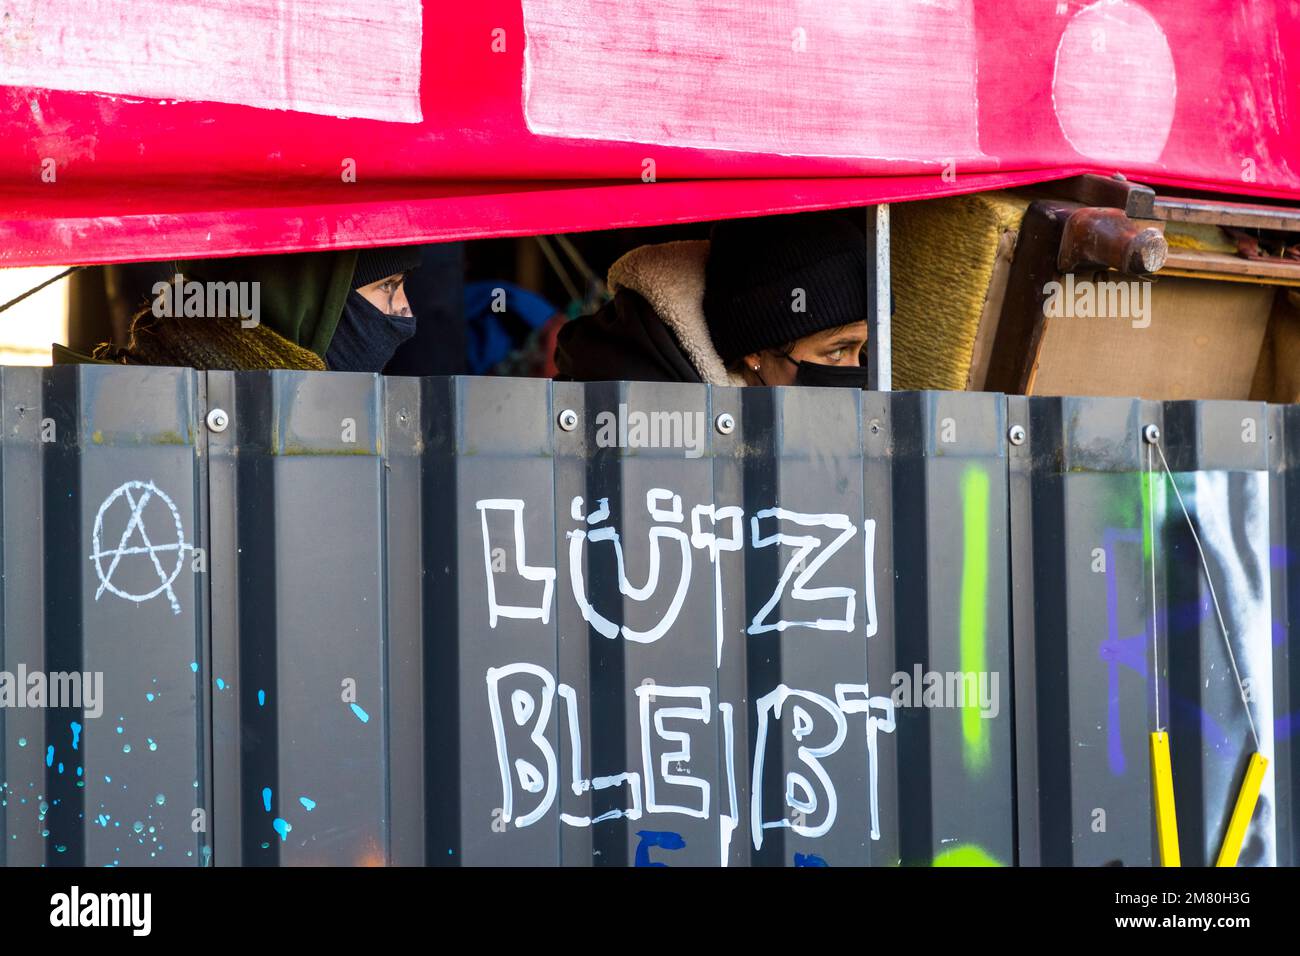 Climate activists have barricaded themselves in the German lignite village of Lutzerath in North Rhine-Westphalia. The activists have been occupying the village for more than two years to prevent it from disappearing from the face of the earth, as agreed in a deal negotiated by political leaders. Energy company RWE mines lignite there, which activists blame for global warming and CO2 pollution. Early this morning, police began evacuating the village. Stock Photo